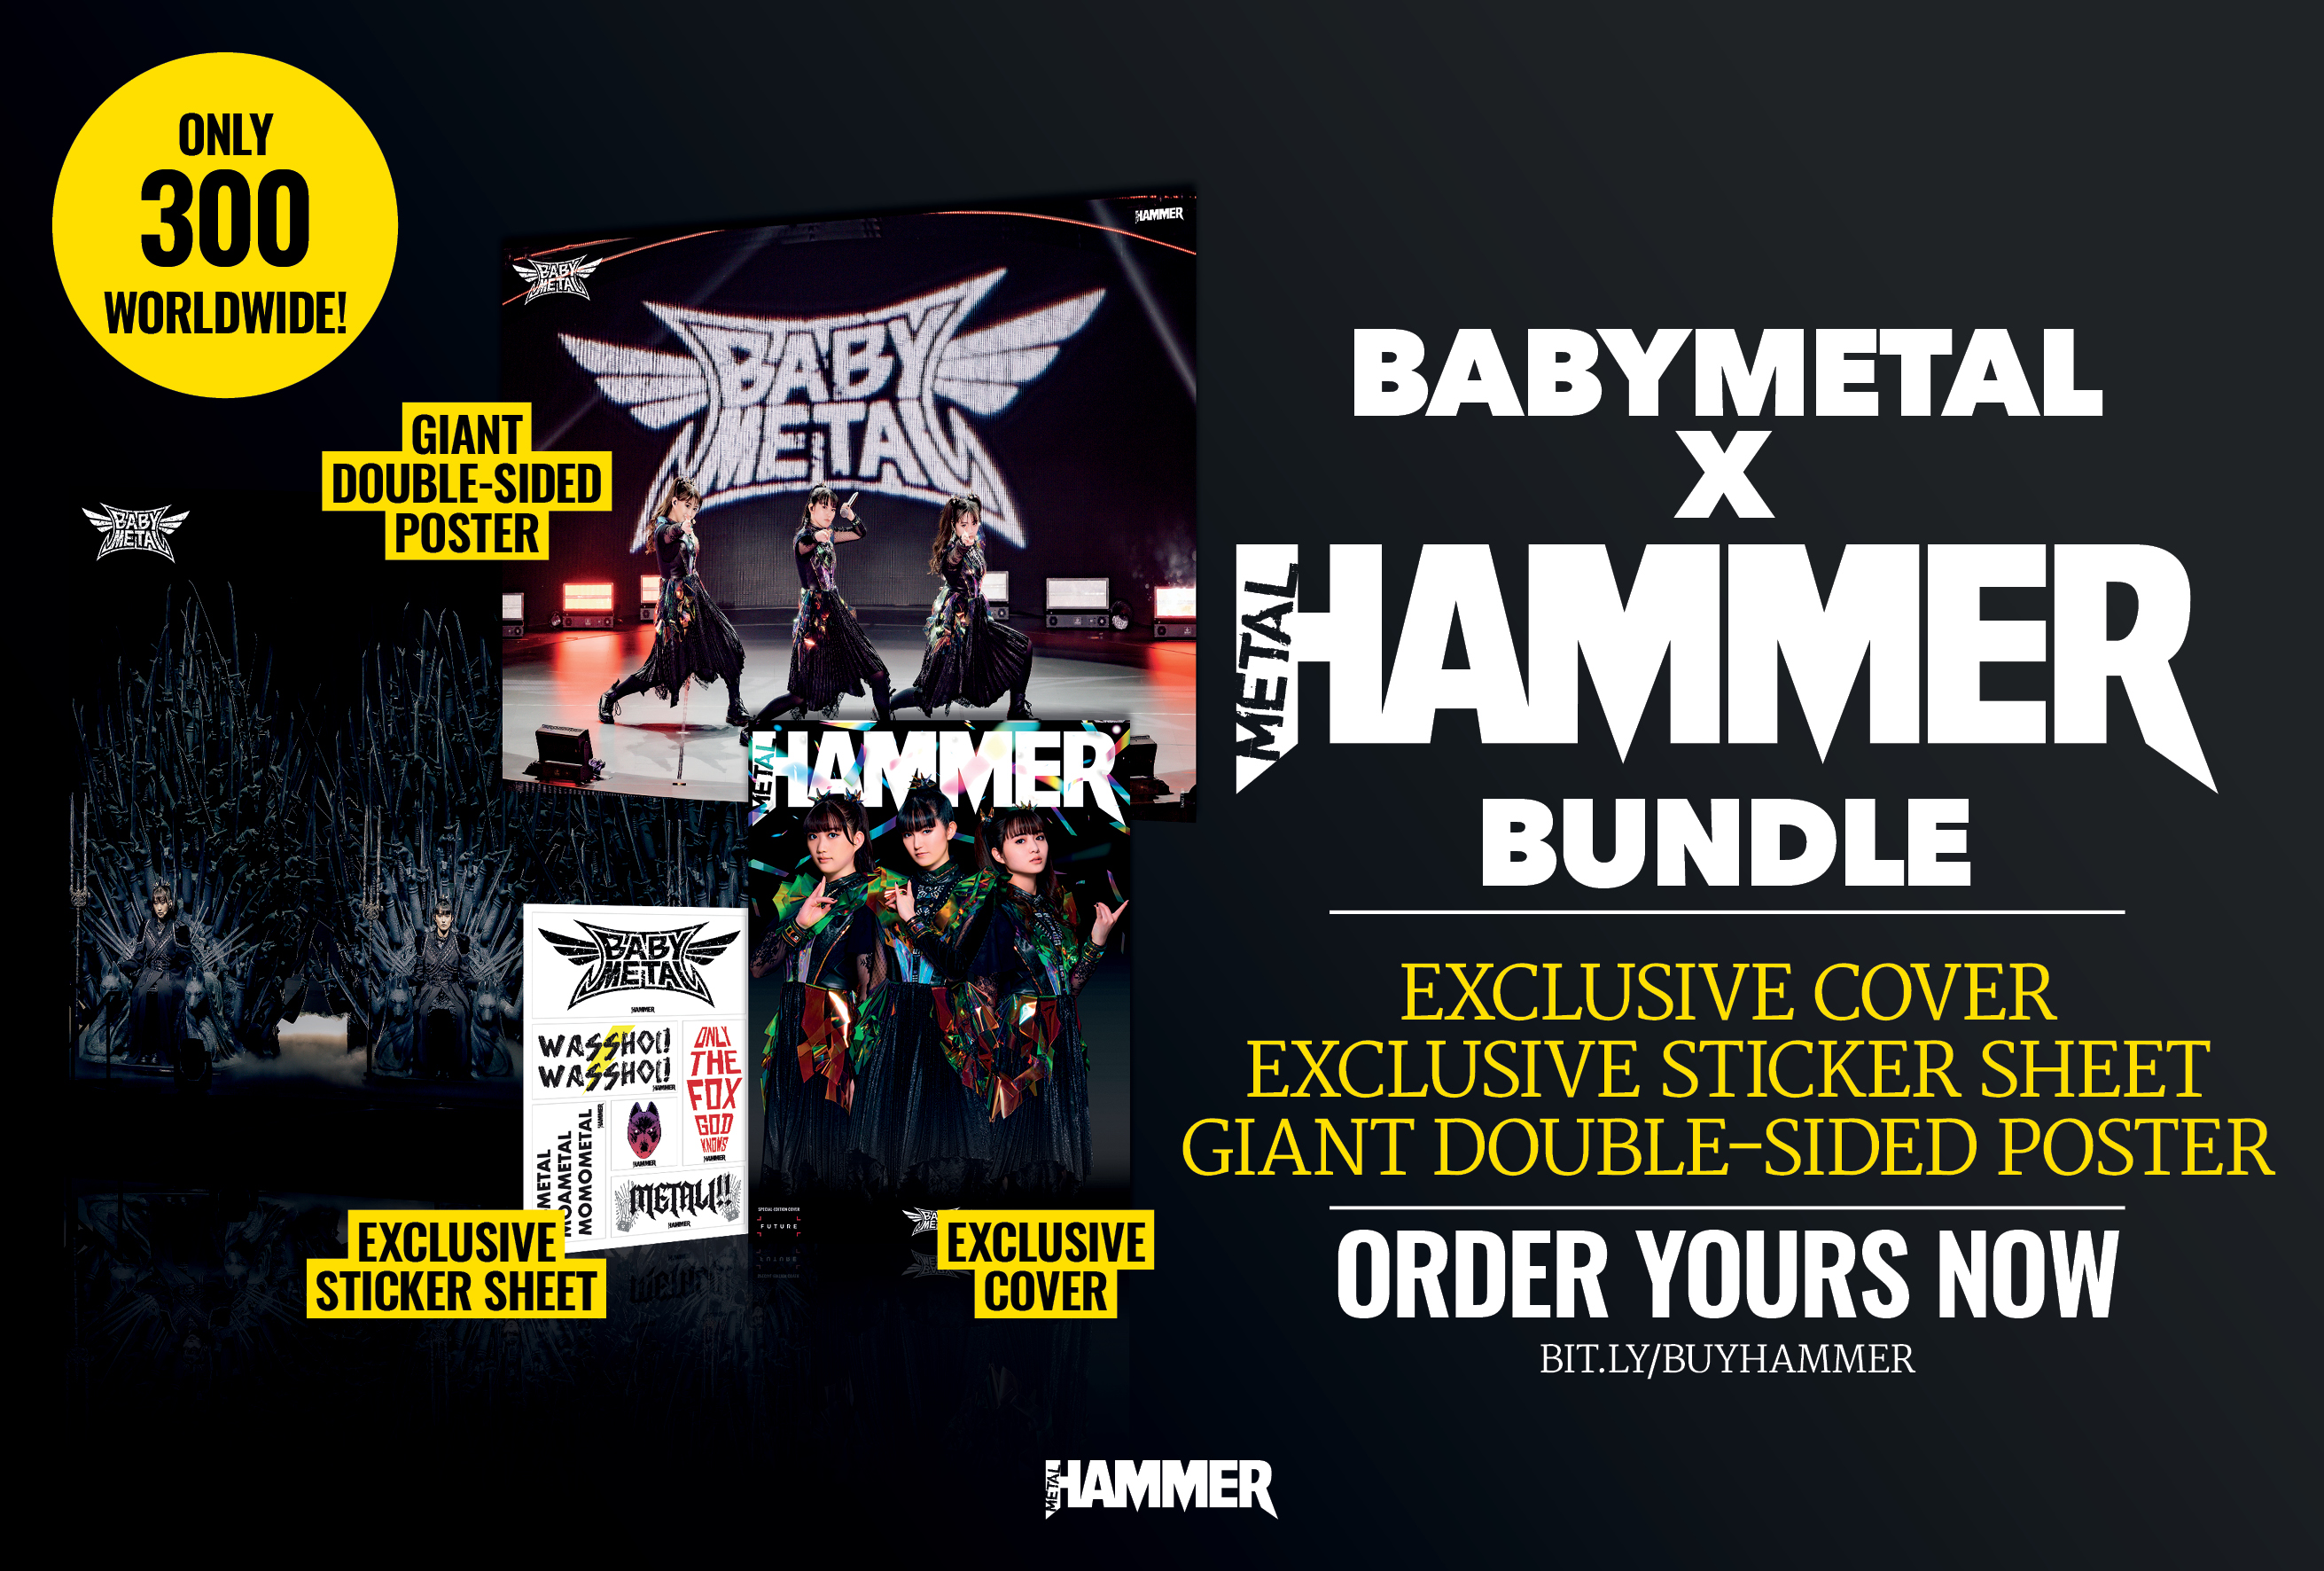 Order your exclusive Babymetal bundle featuring an alternate